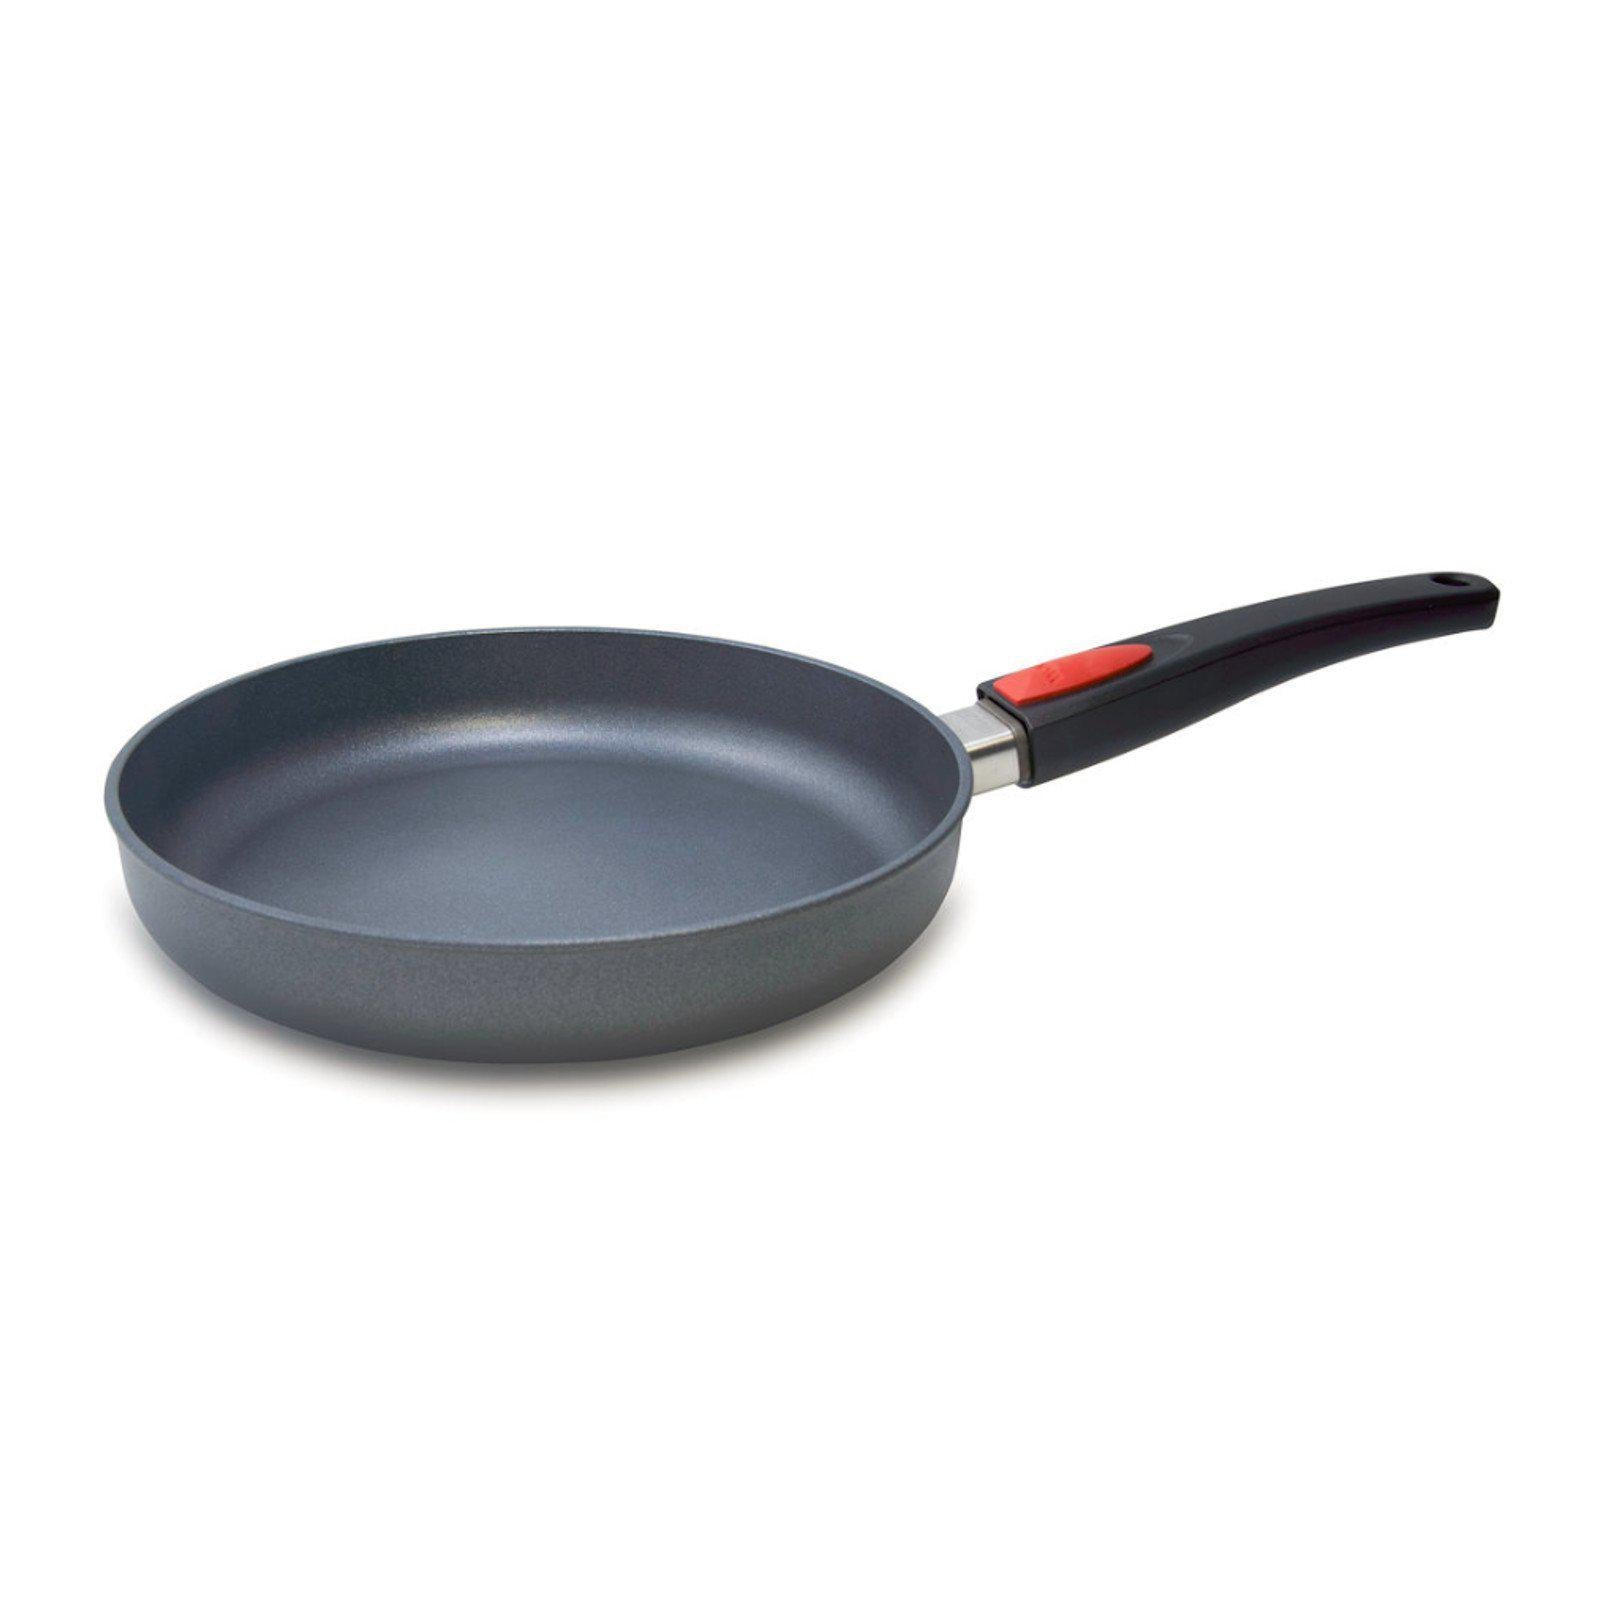 Woll Diamond Lite 20 cm Induction Frying Pan-Frying Pan-Chef's Quality Cookware